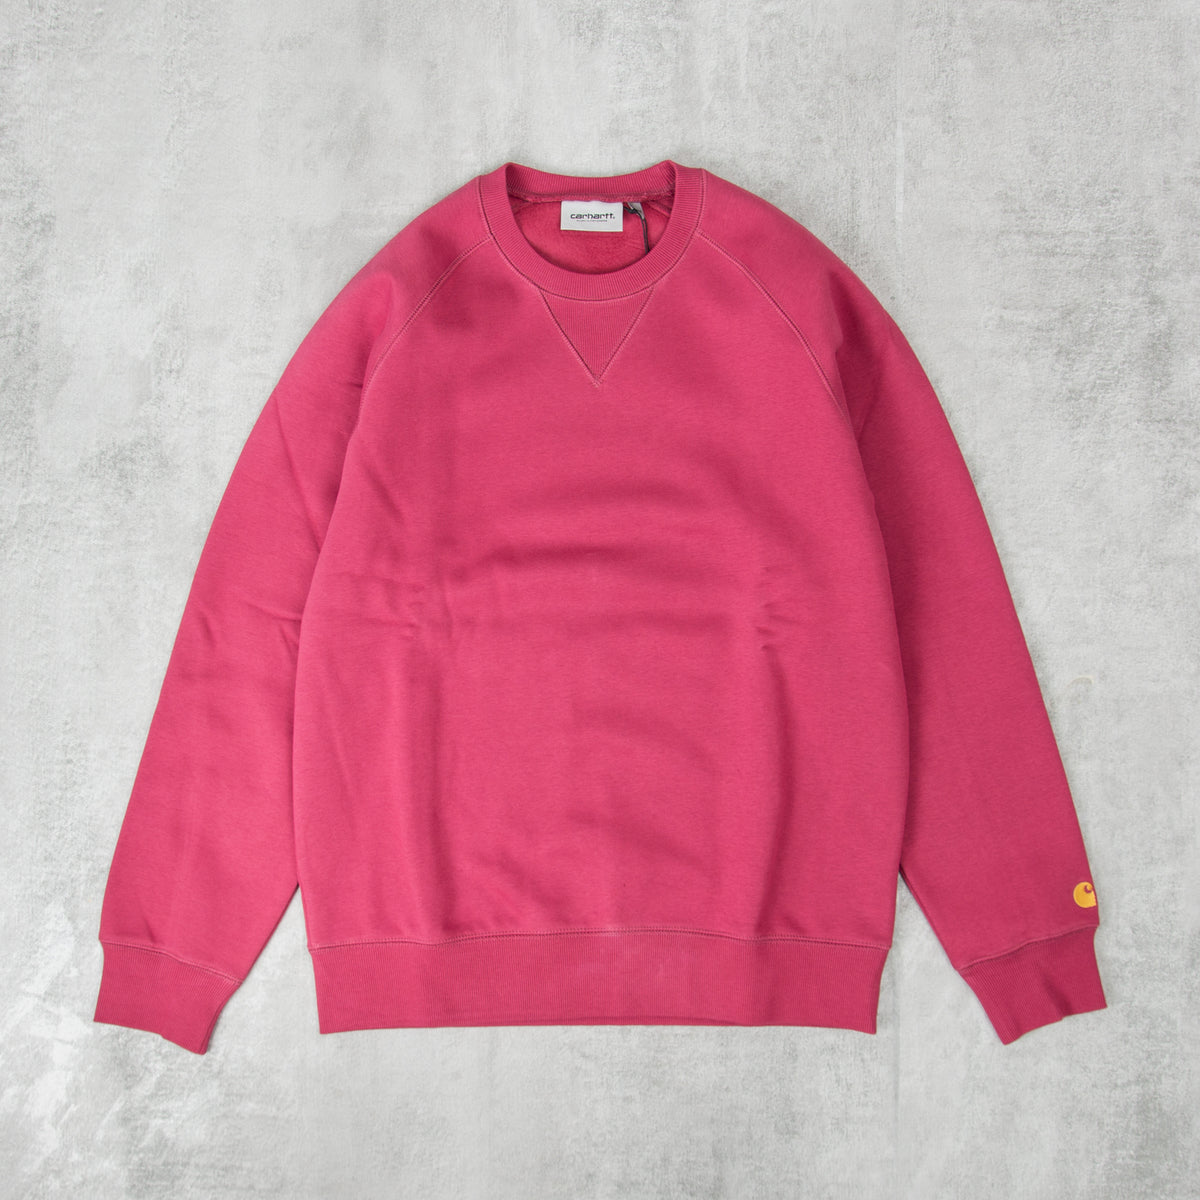 Get the Carhartt WIP Chase Sweatshirt - Punch@Union Clothing | Union ...